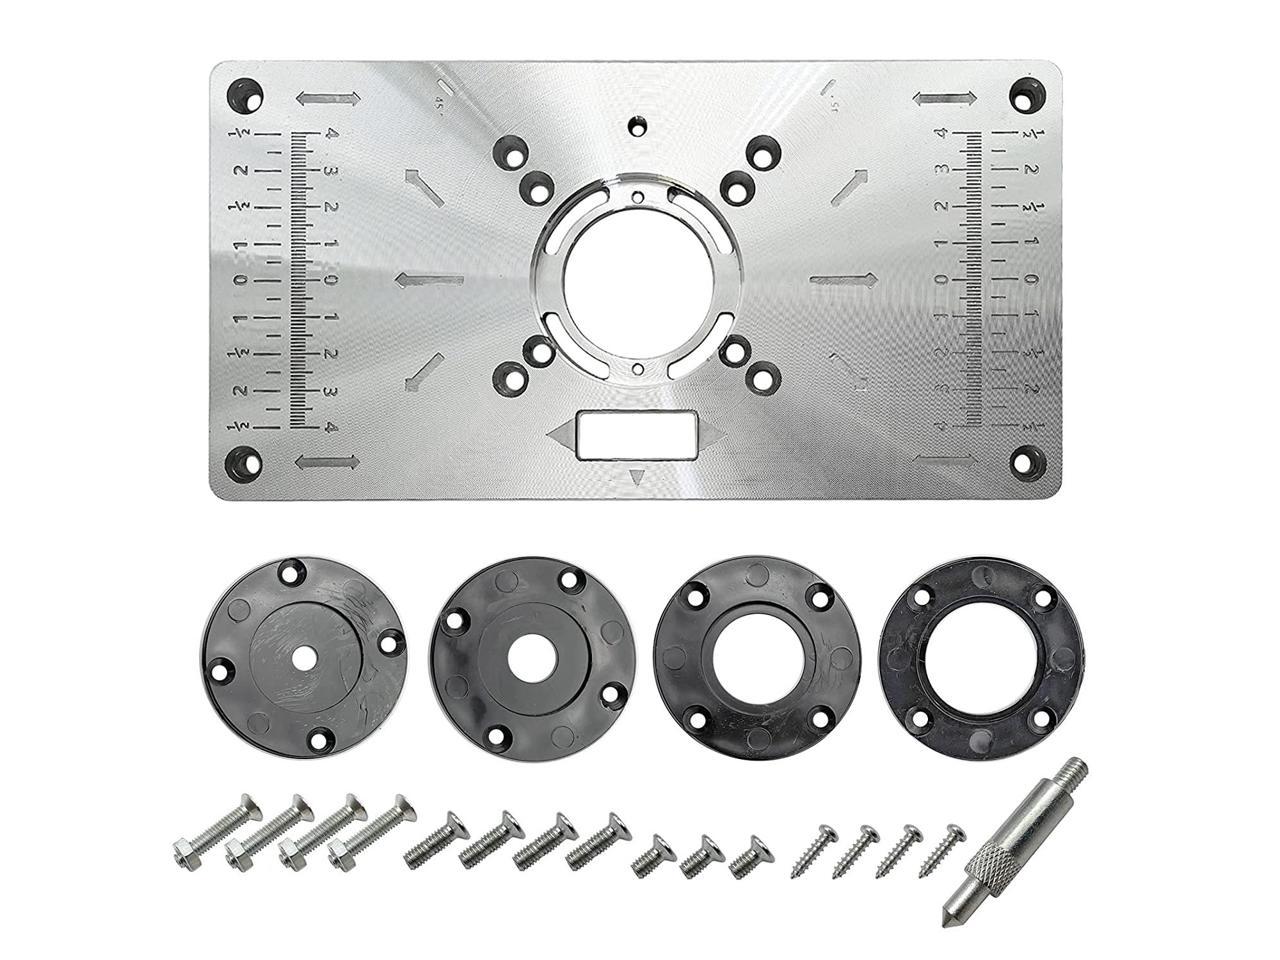 Aluminum Router Table Insert Plate w/ 4 Rings Screws For Woodworking Benches 